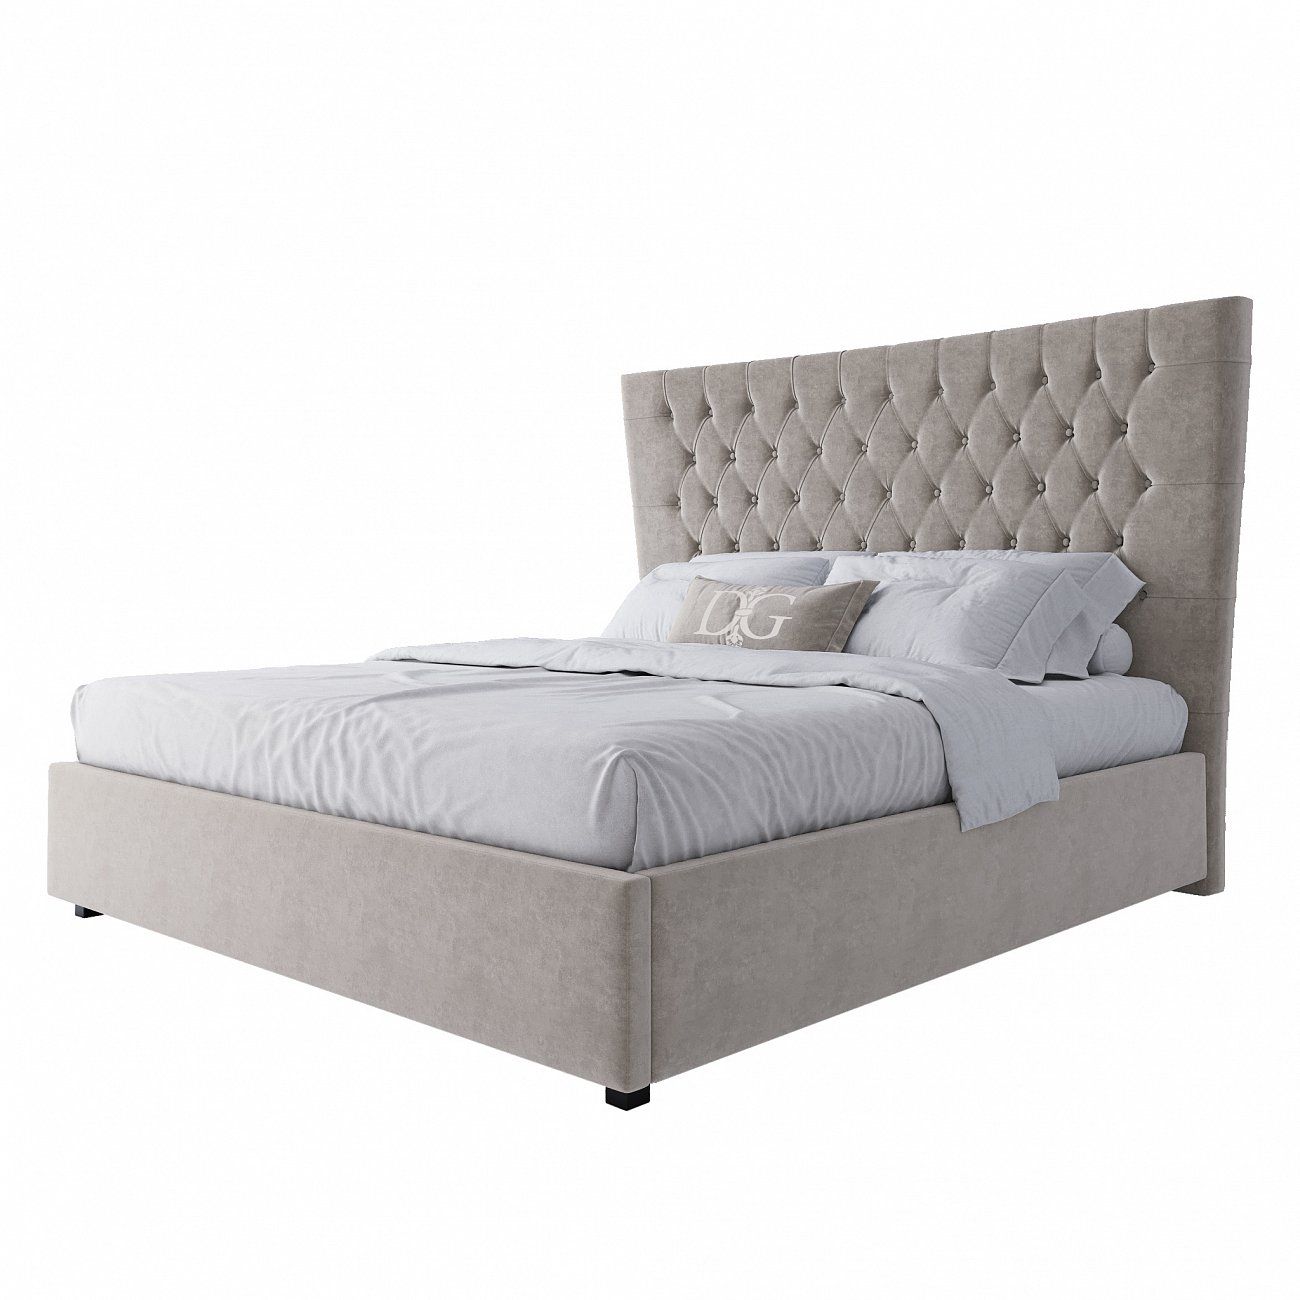 Double bed with upholstered headboard 180x200 cm light beige QuickSand